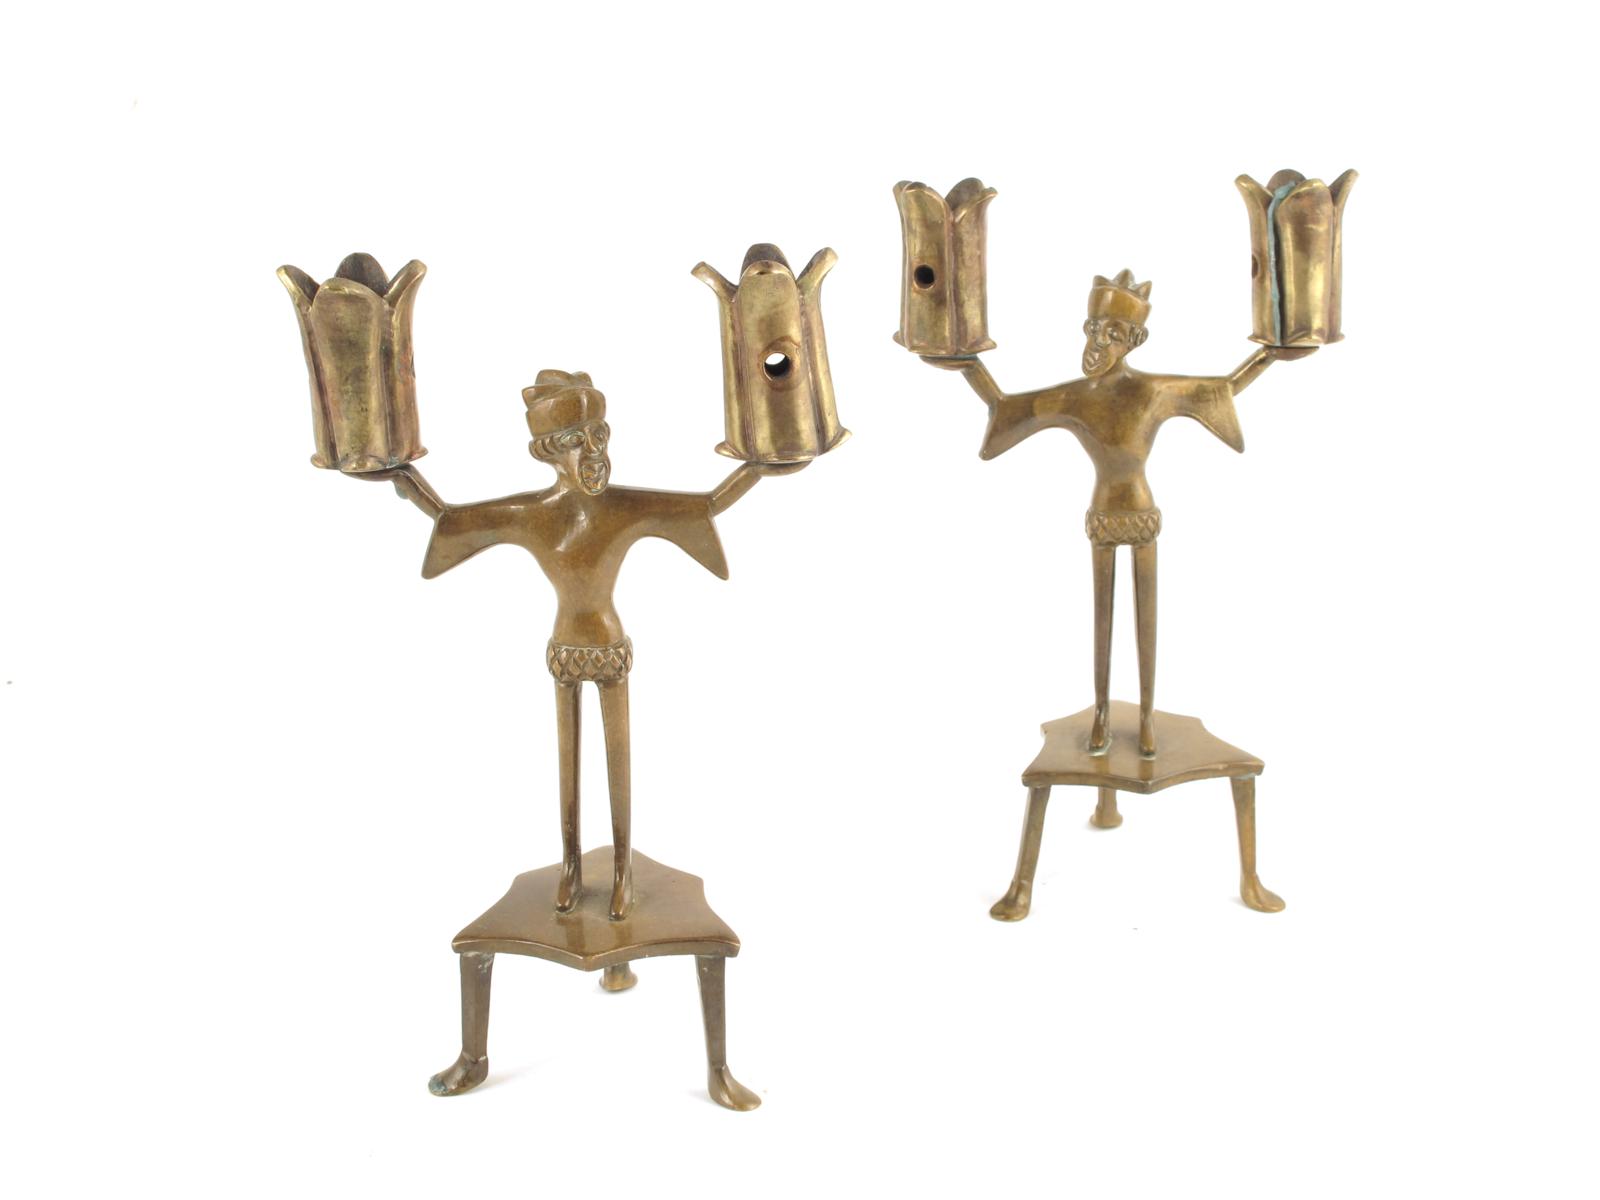 A pair of Central European bronze figural candlesticks, in 15th century style, 9in (22.8cm) high,